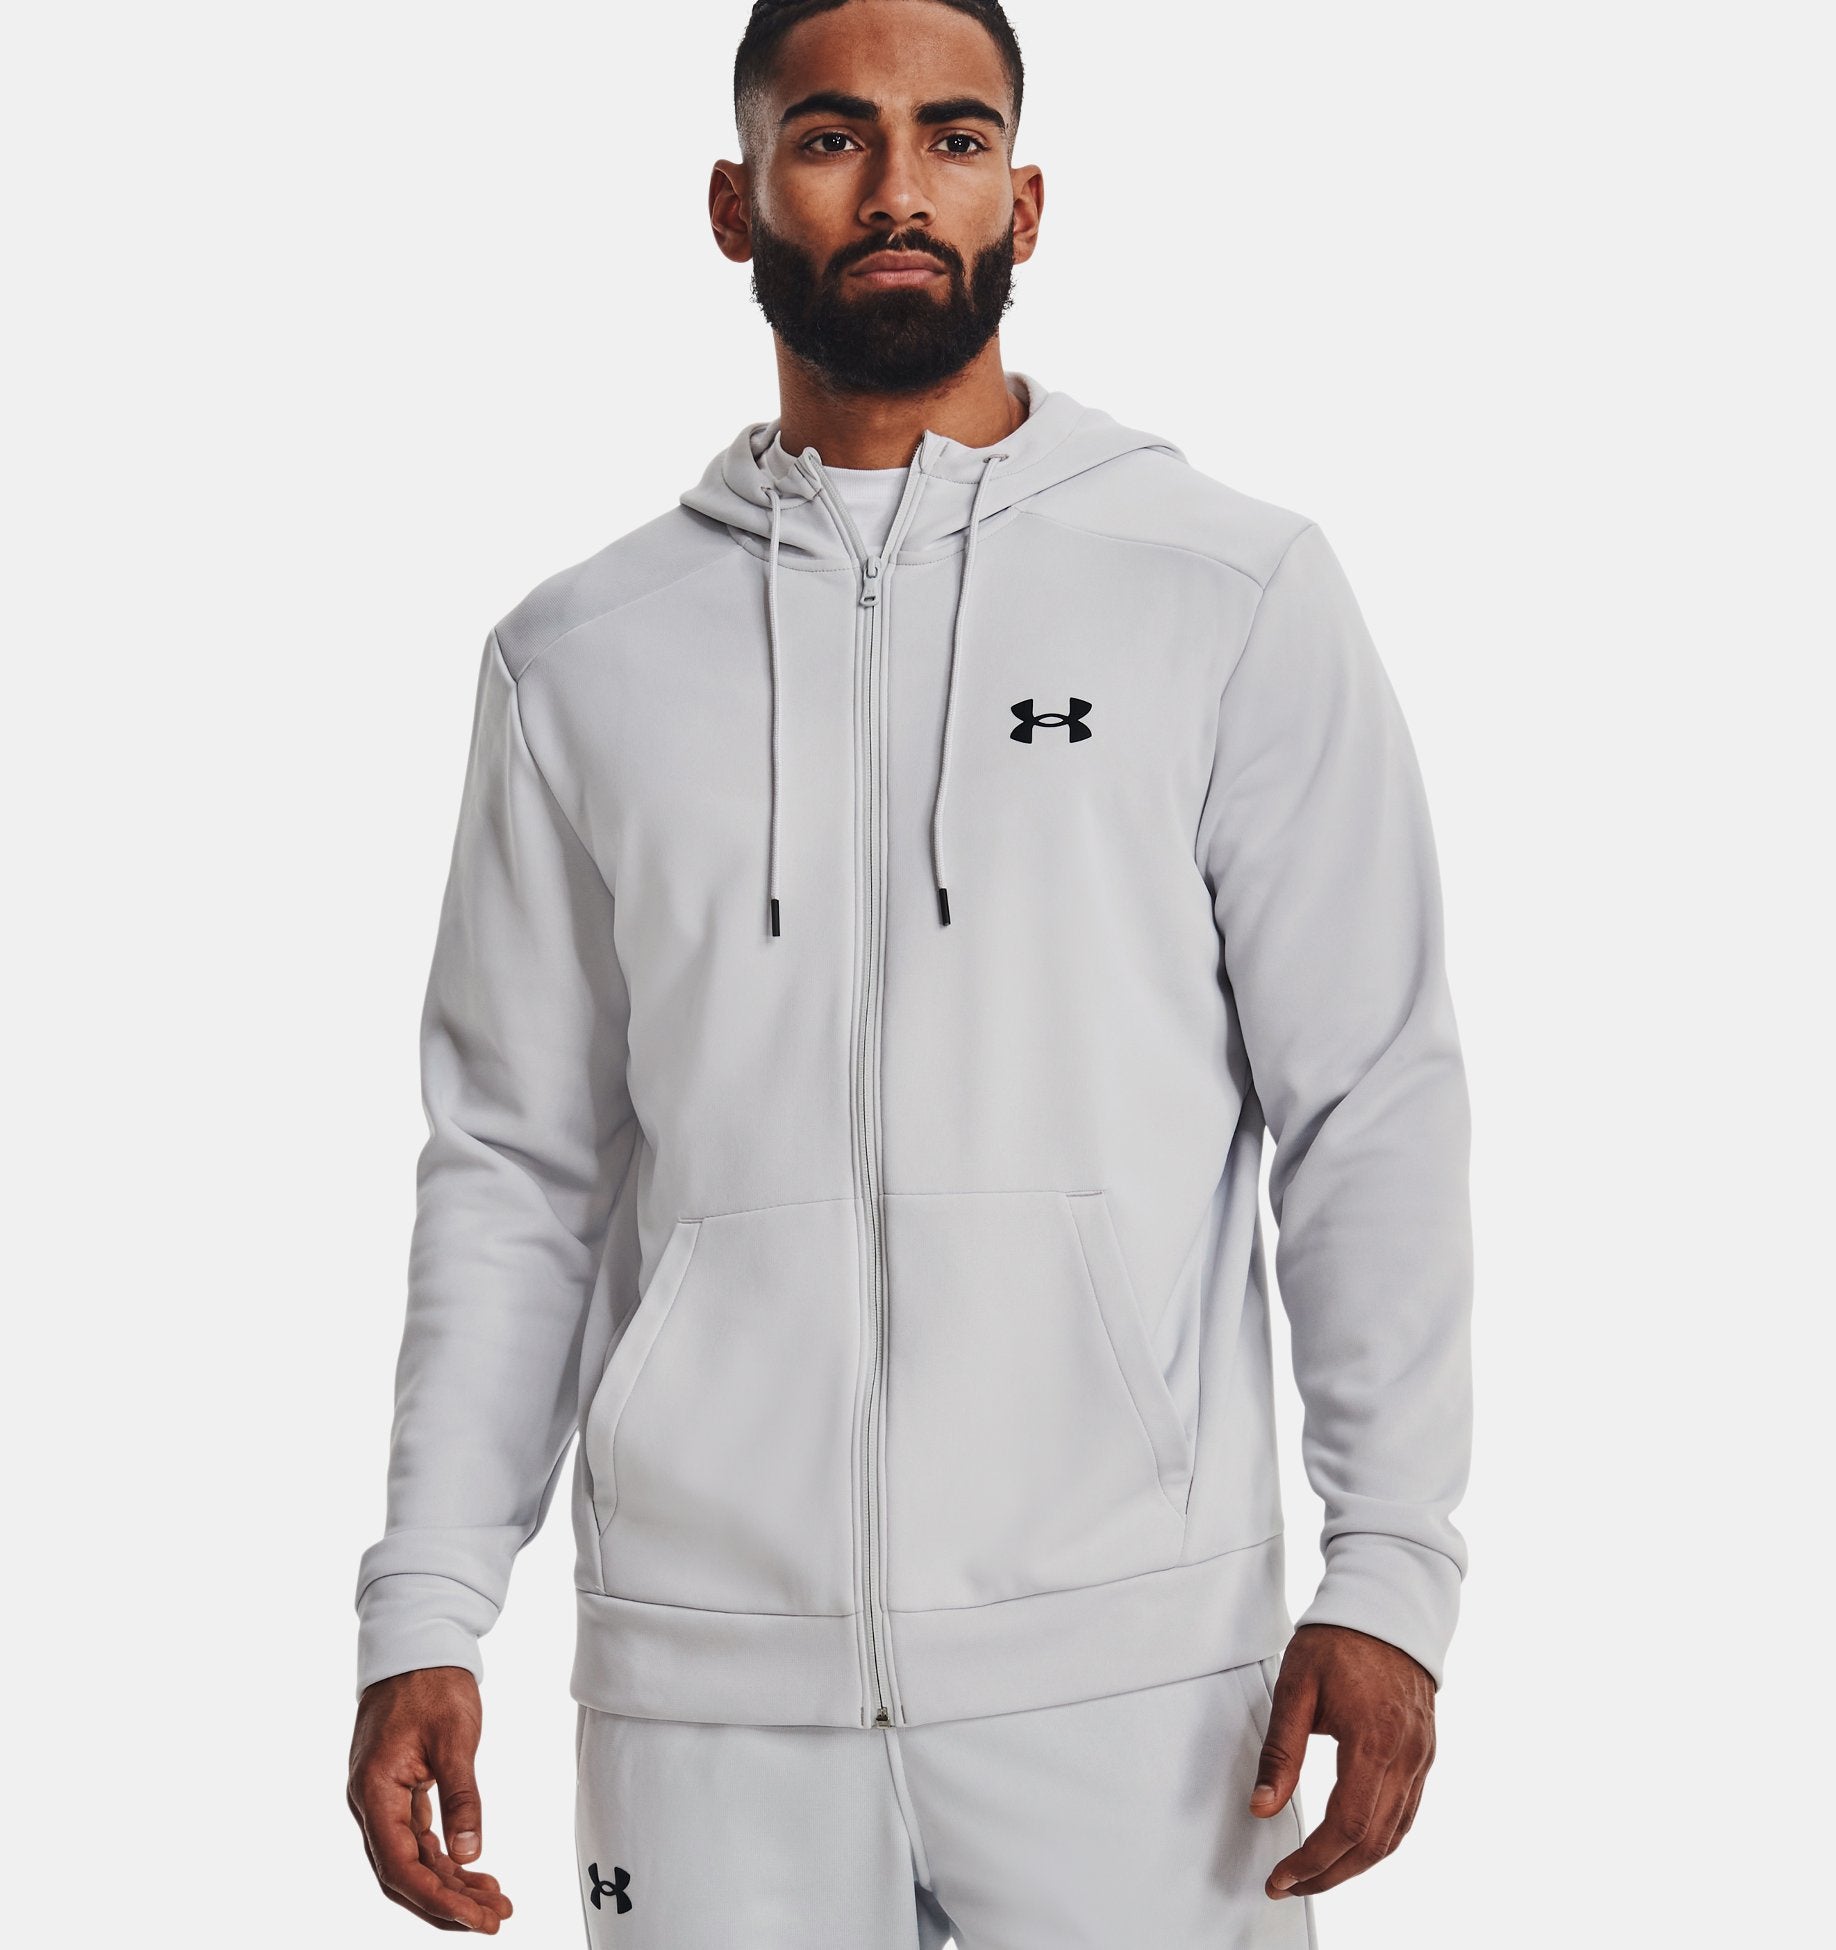  Under Armour Men's Armour Fleece Solid Hoodie , Pitch